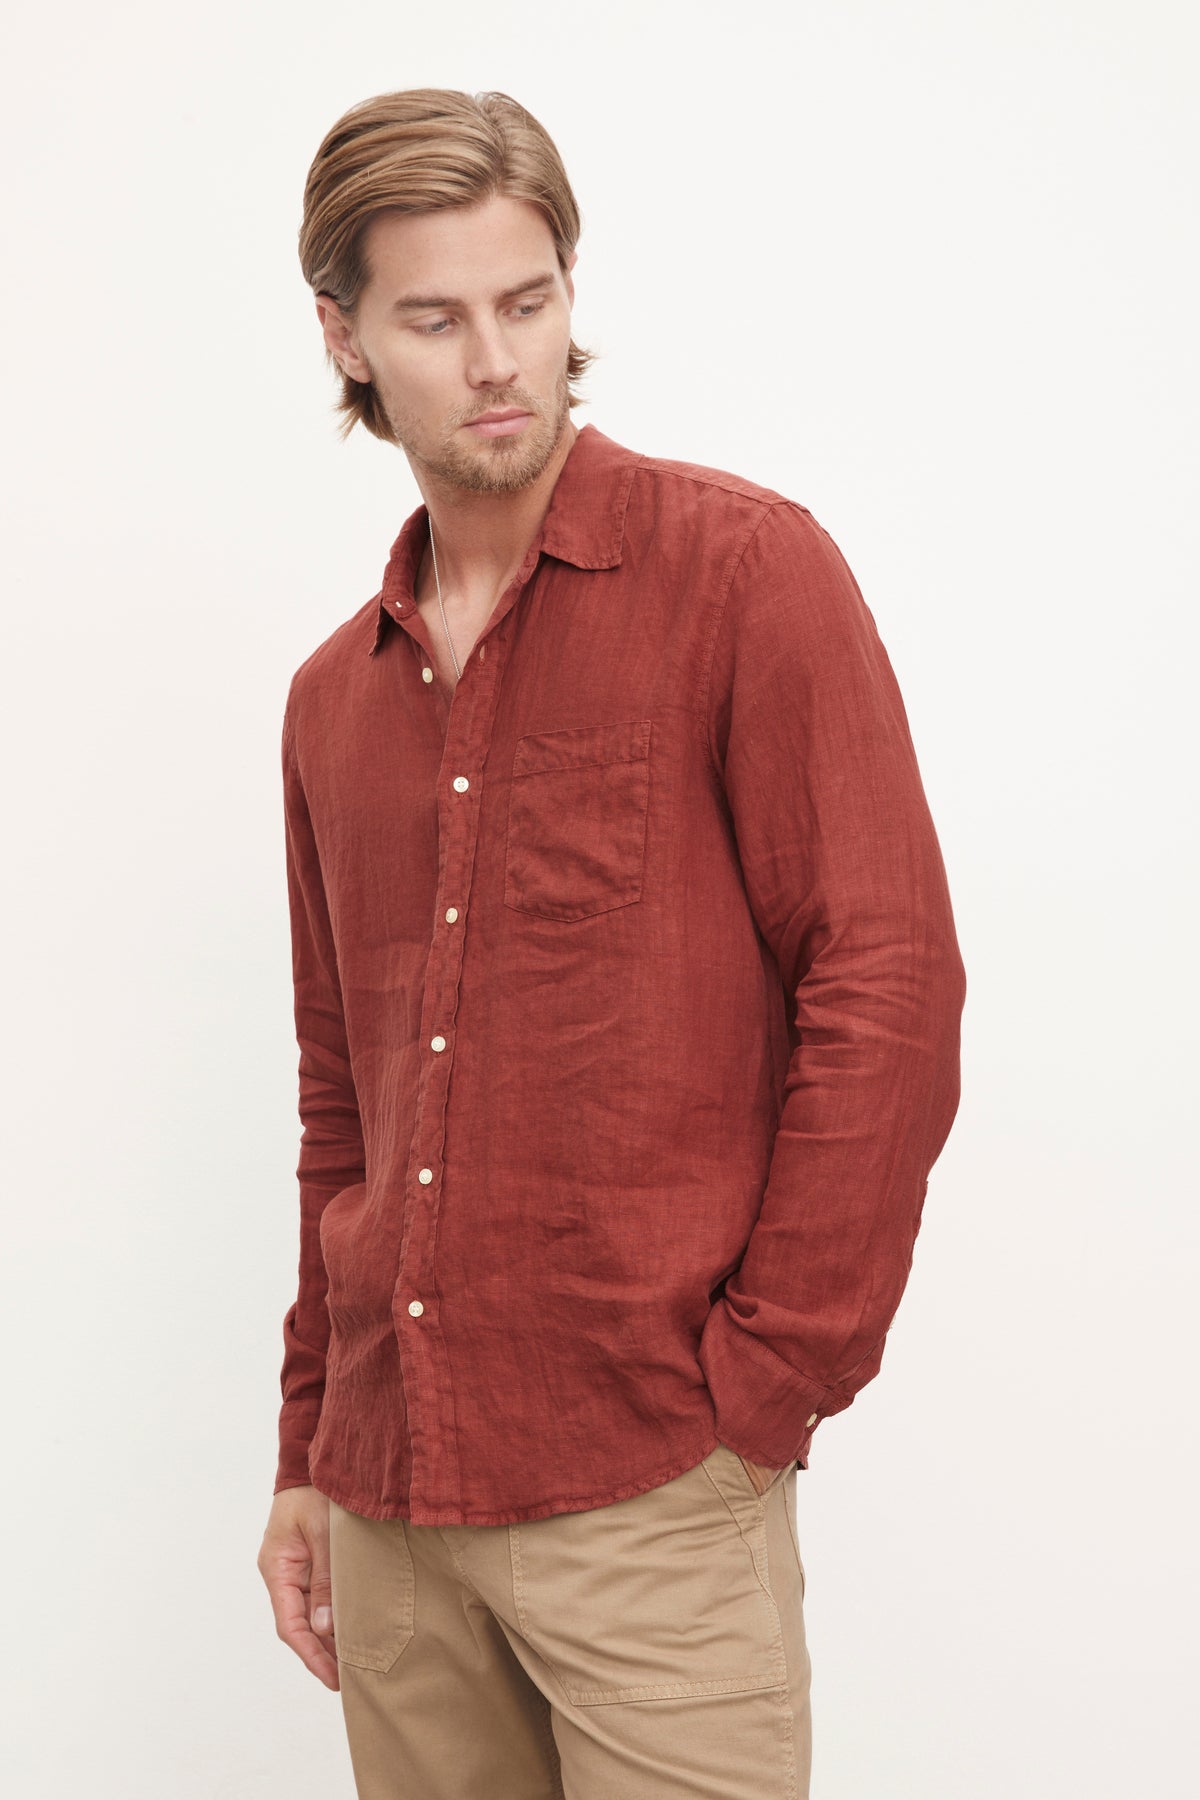 A stylish man wearing a Benton Linen Button-Up Shirt by Velvet by Graham & Spencer in red.-36009360294081